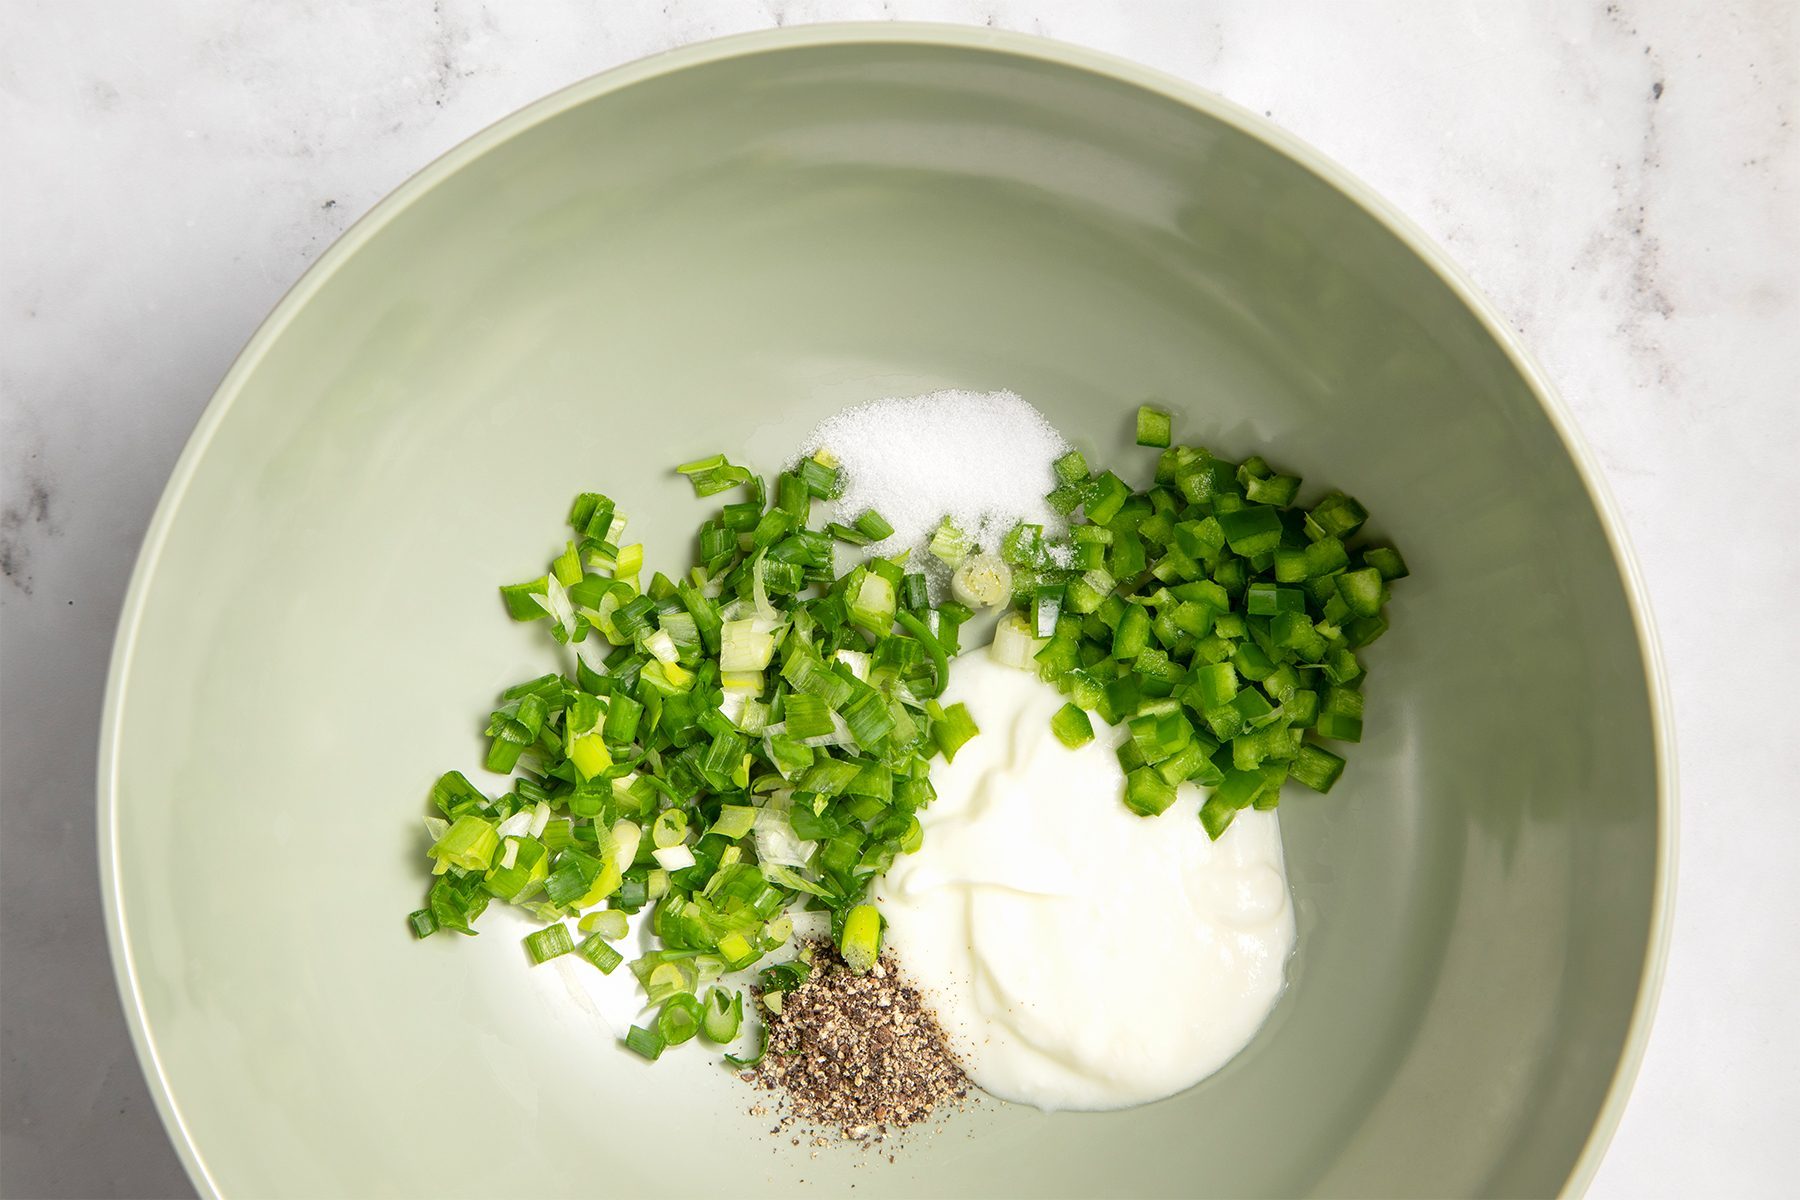 A light green bowl containing chopped green onions, diced green bell peppers, a small pile of sugar, a dollop of yogurt, and a sprinkle of ground black pepper, all neatly arranged on a light surface.